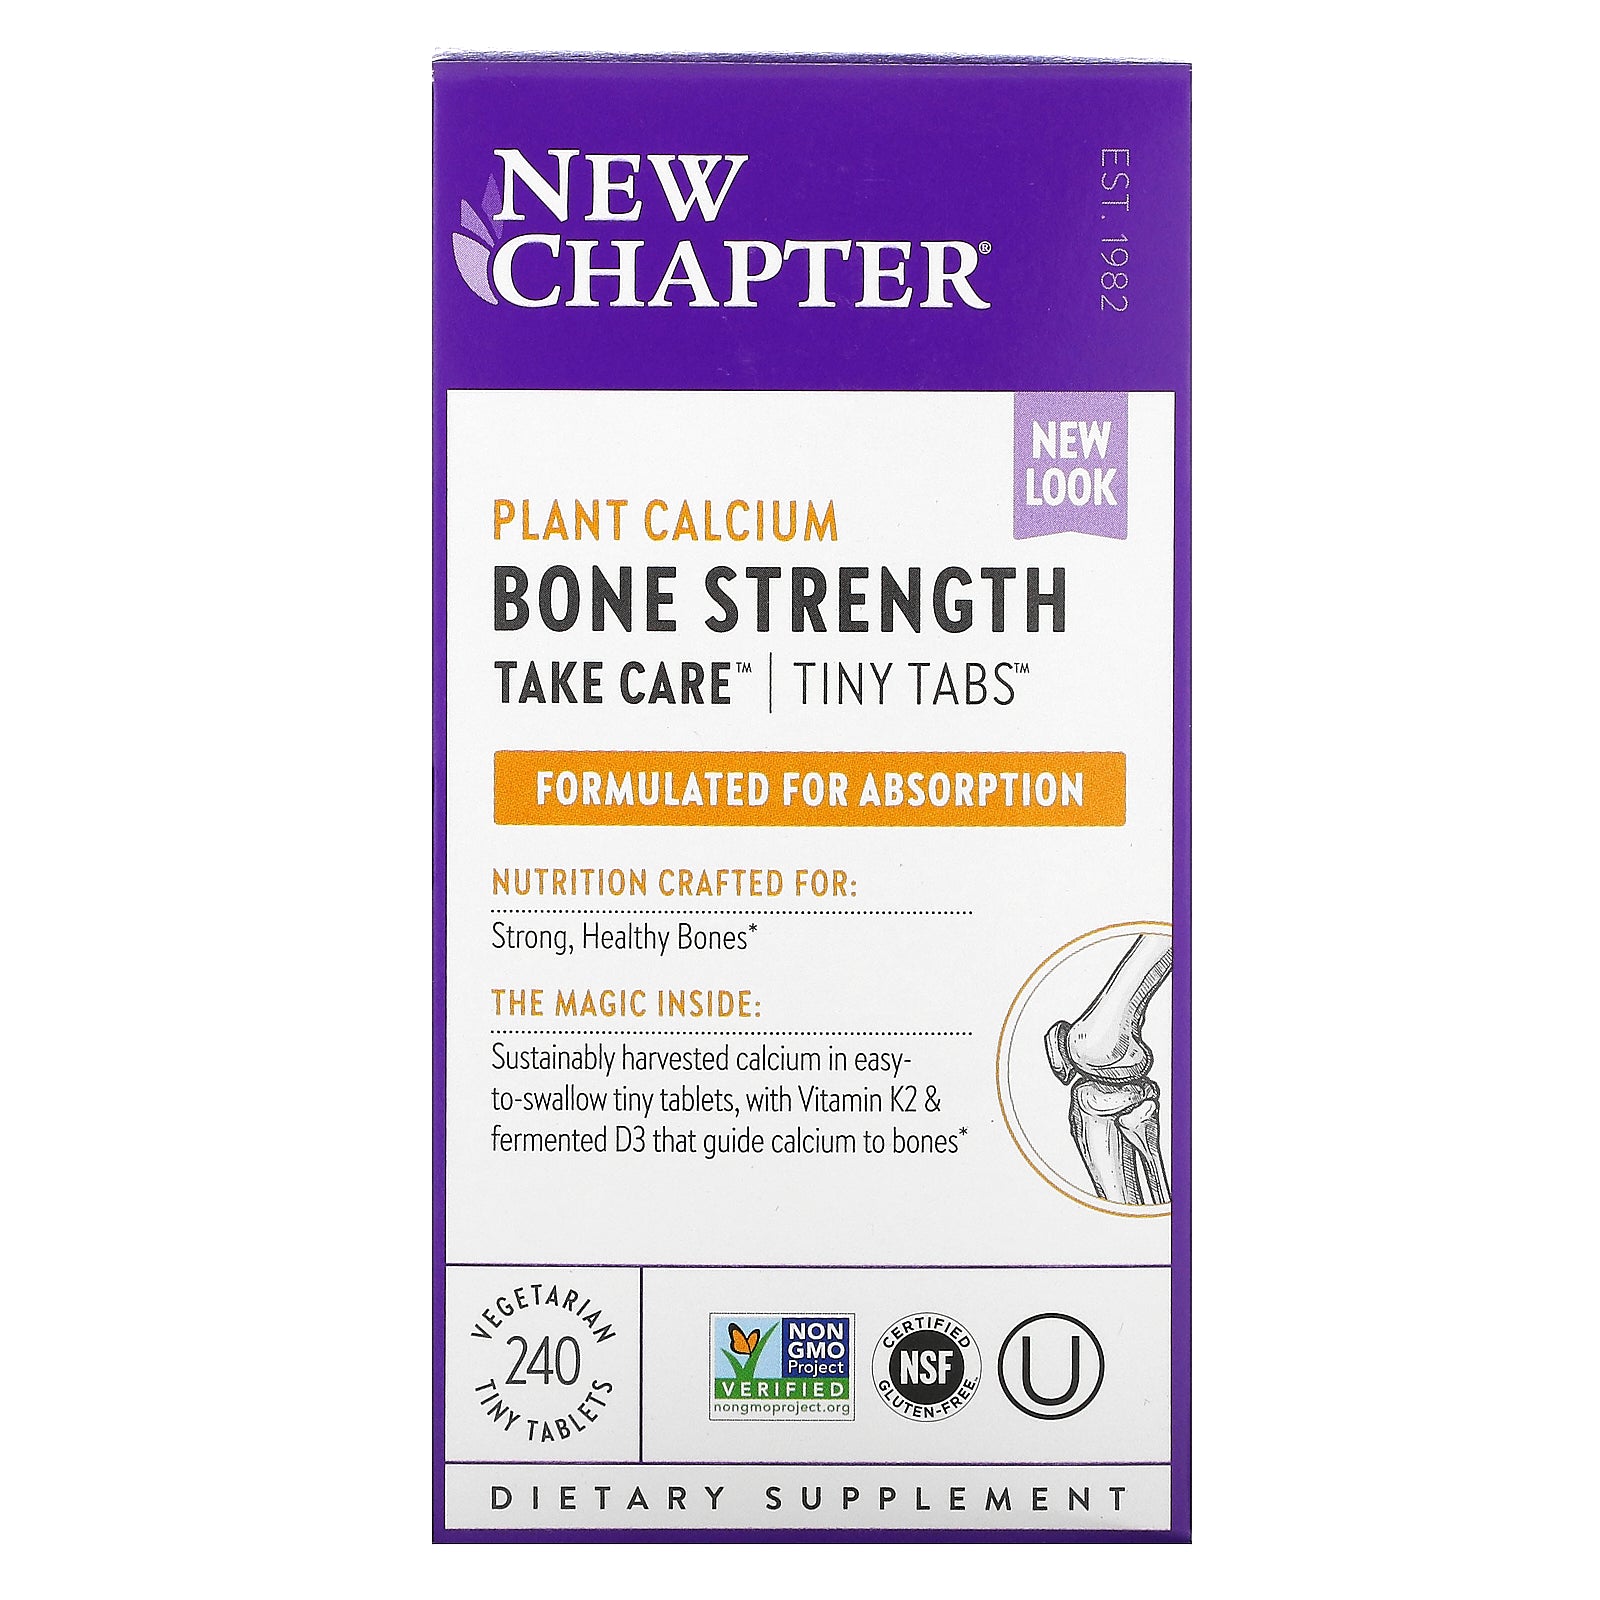 New Chapter, Bone Strength Take Care, 240 Vegetarian Tiny Tablets